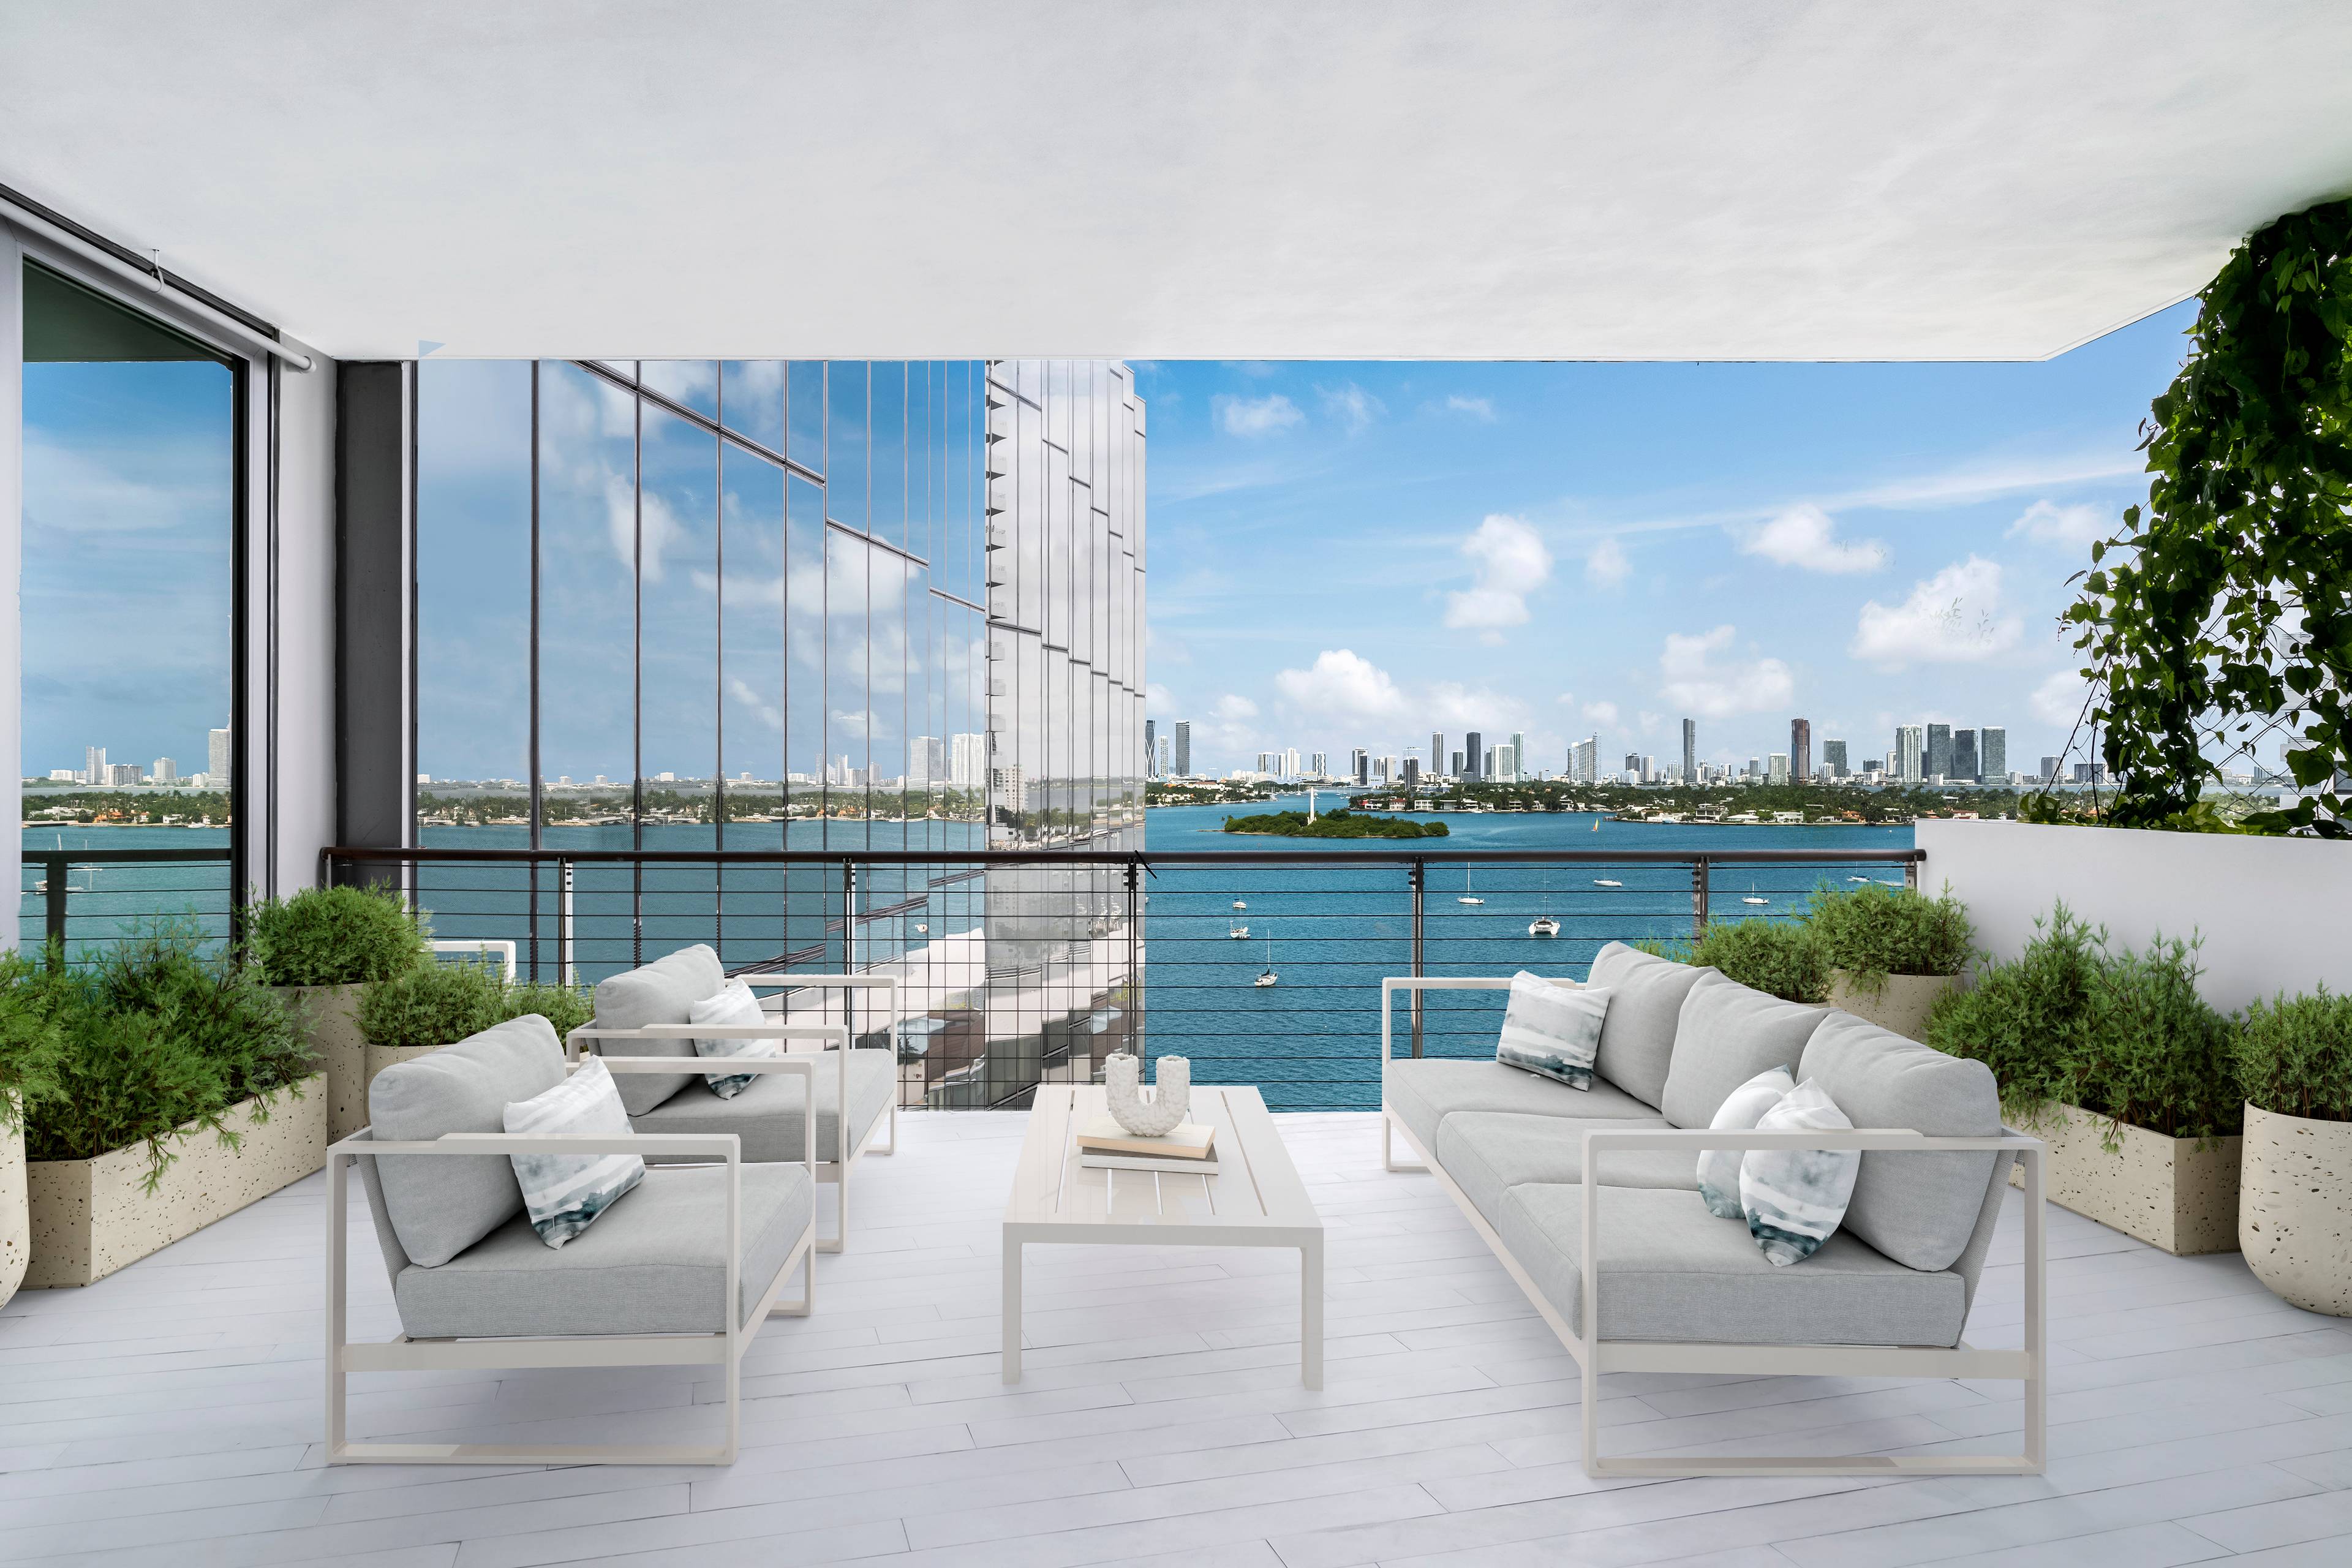 Miami Beach Waterfront Luxury Condo | XL 5-Bedroom, 5.5-Bedroom Residence with Miami Skyline and Direct Bay Views